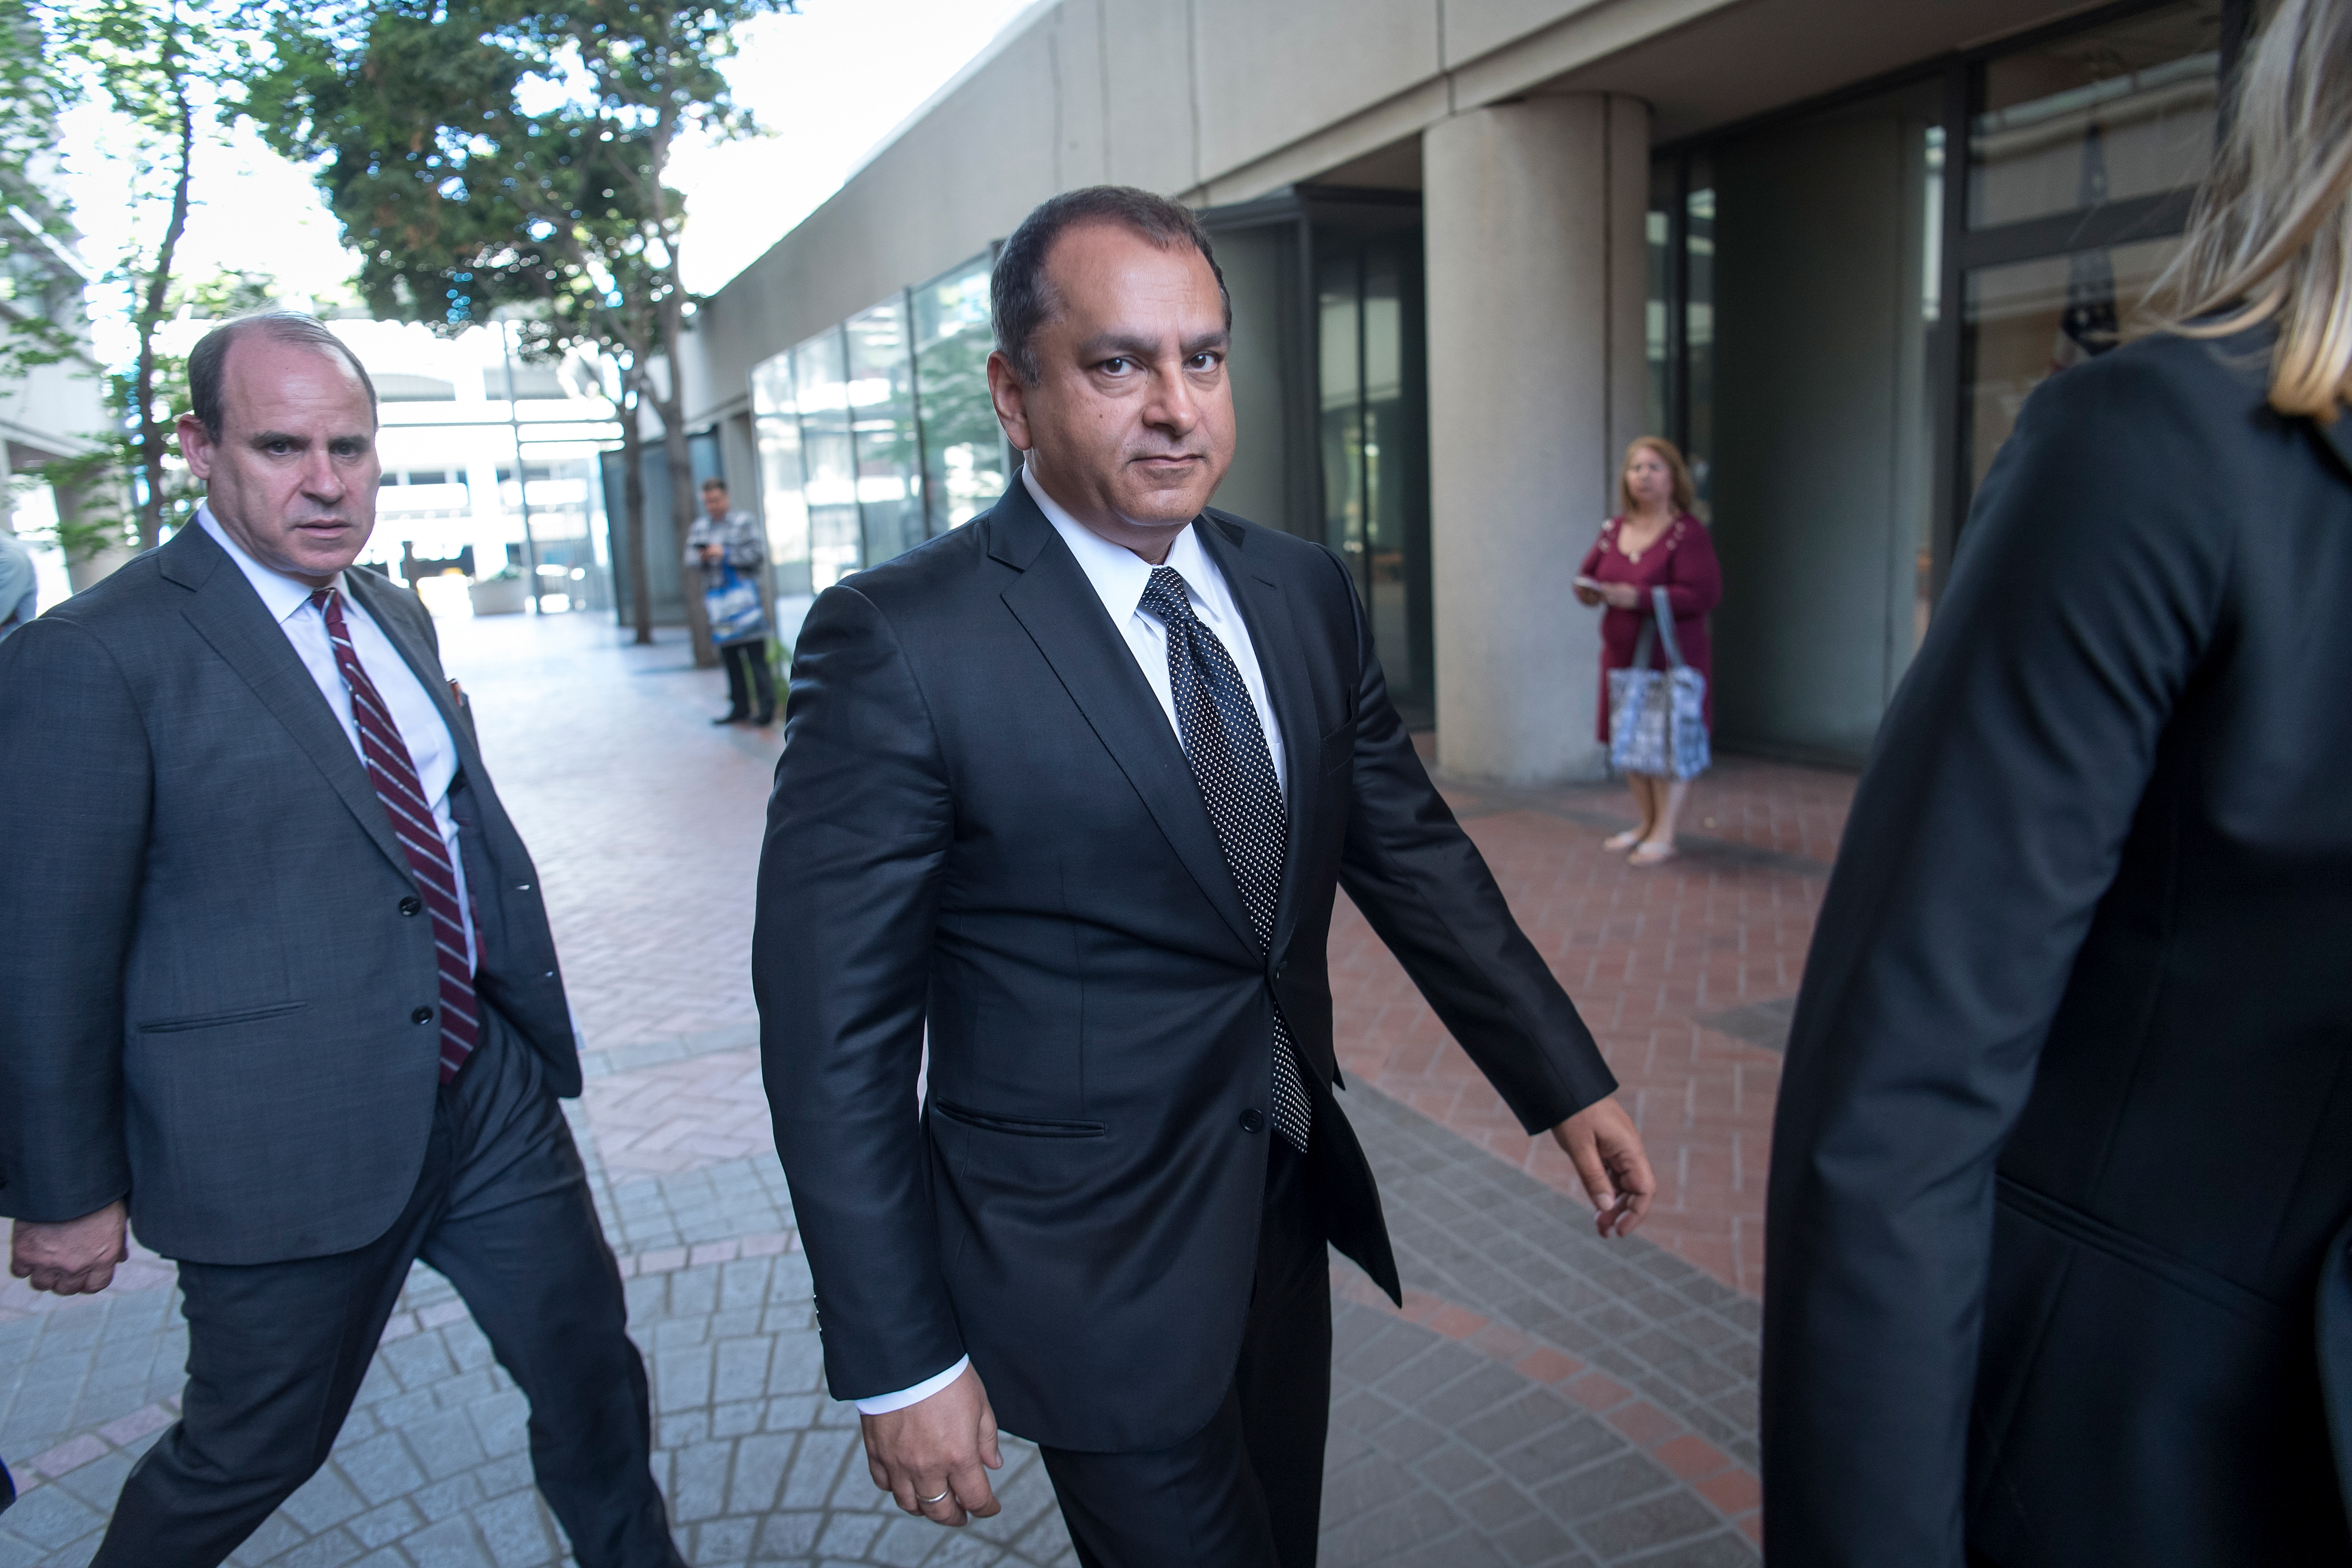 Sunny Balwani exits federal court in San Jose, California, on April 22, 2019. | Source: Getty Images